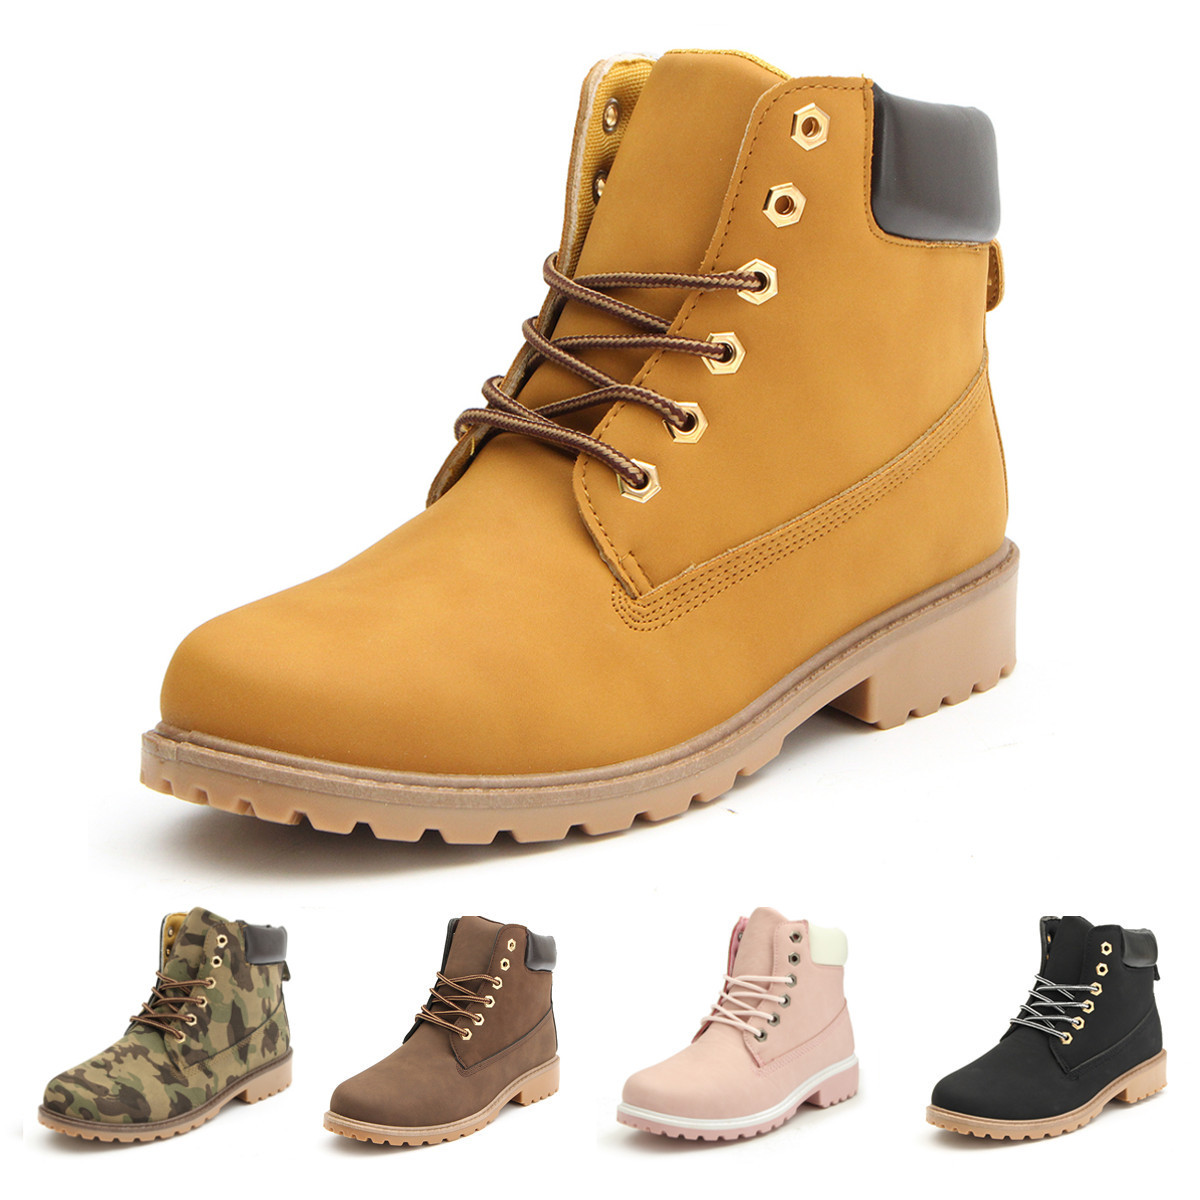 boots women image is loading women-ladies-hiking-boots-womens-flat-ankle-desert- QSVCHJT